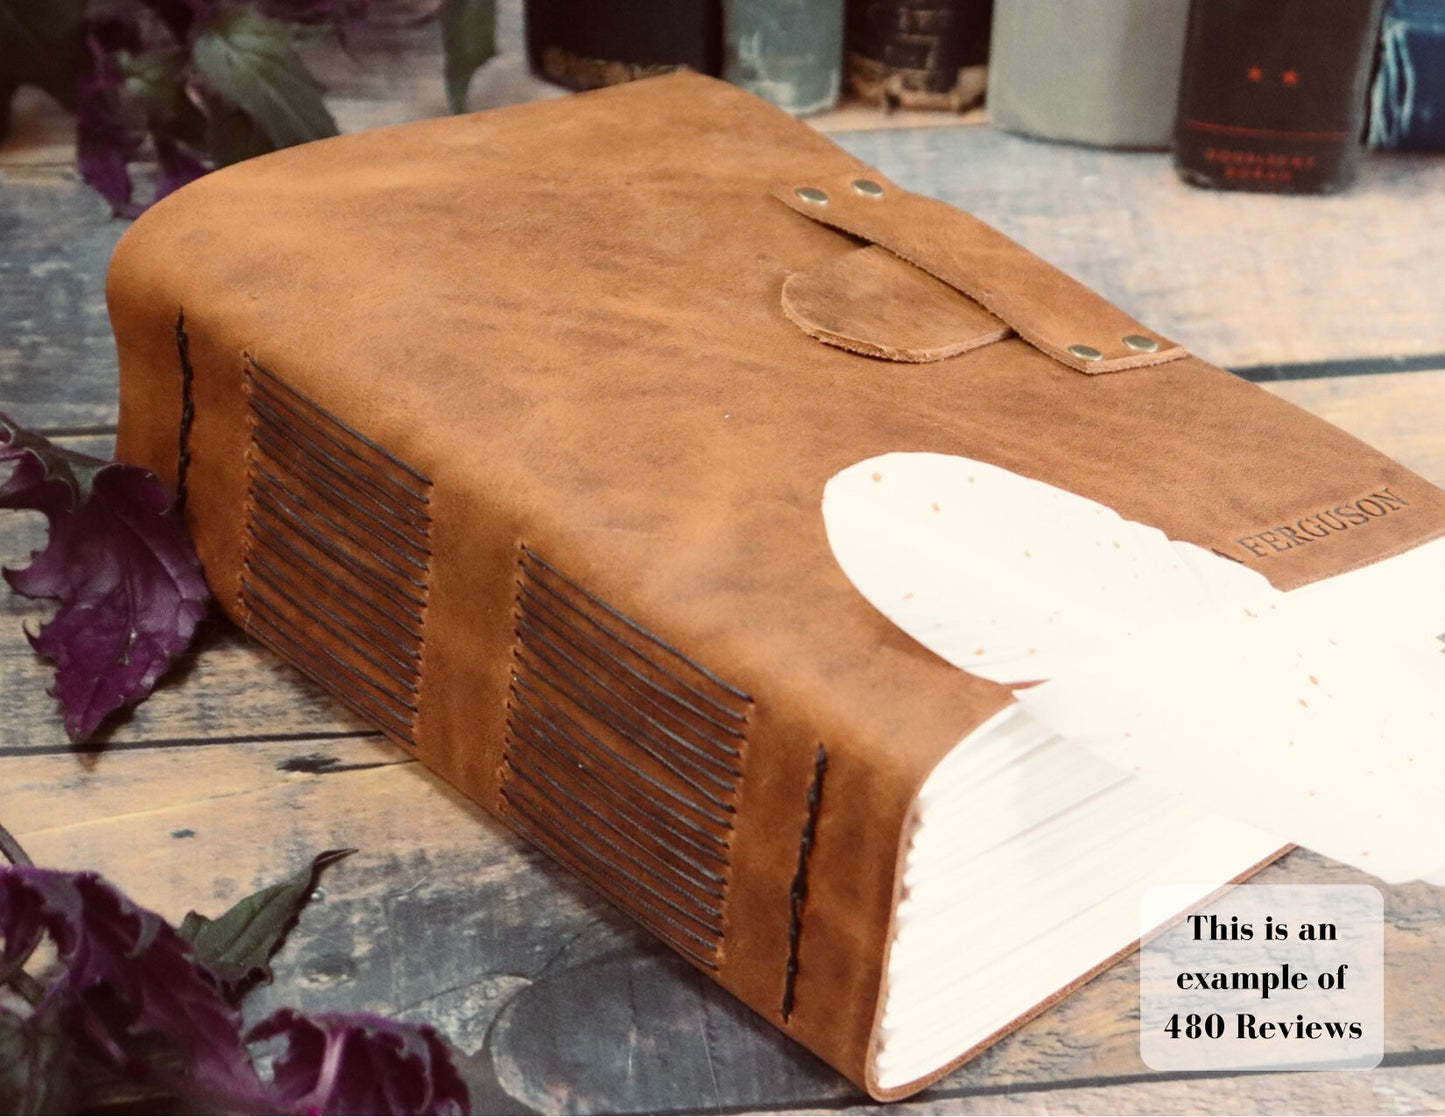 BOOK REVIEW JOURNAL, Personalized Leather Rustic Reading Log Book, Premium Gift for Book Lovers & Bibliophiles, Review Log For Novels